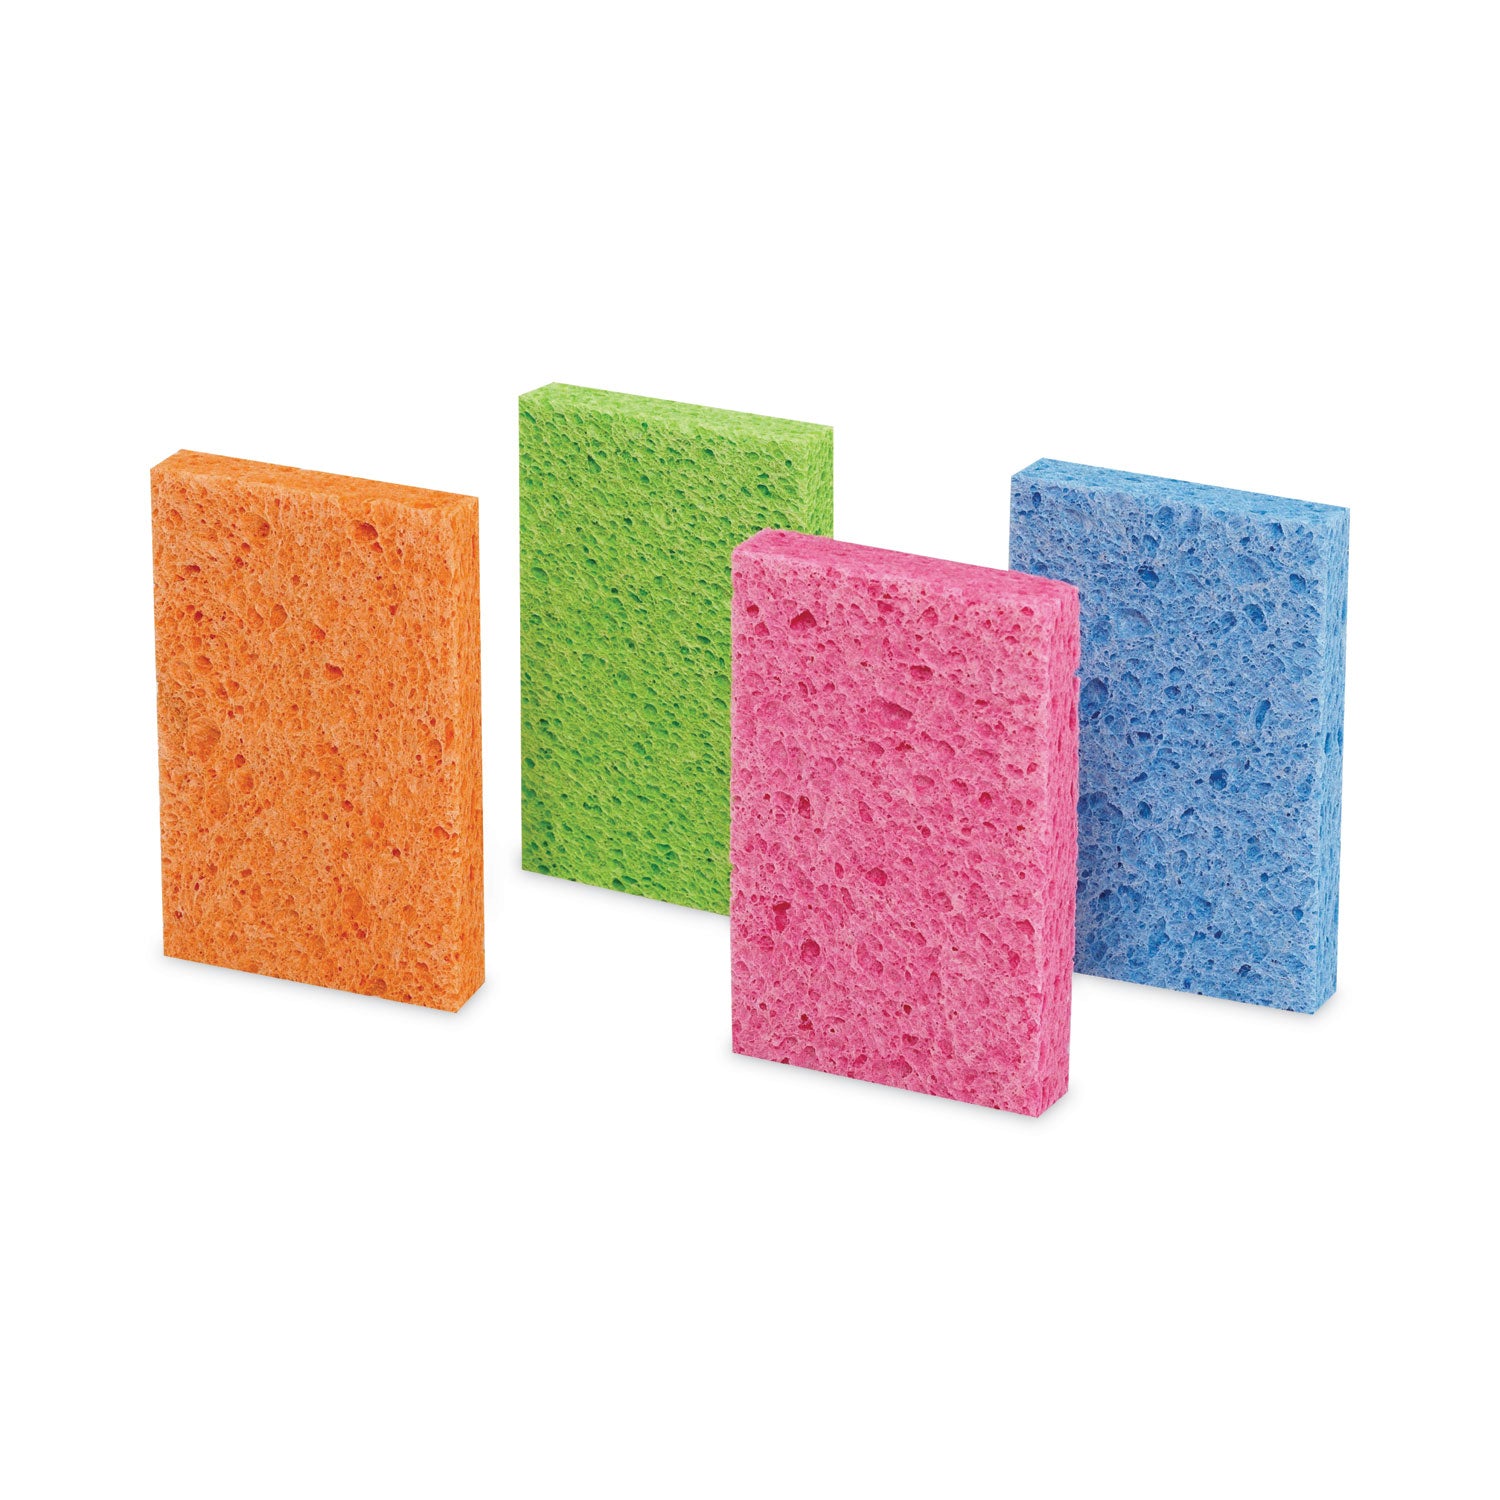 vibrant-color-sponges-47-x-3-06-thick-assorted-colors-4-pack_mmm7274fd - 2